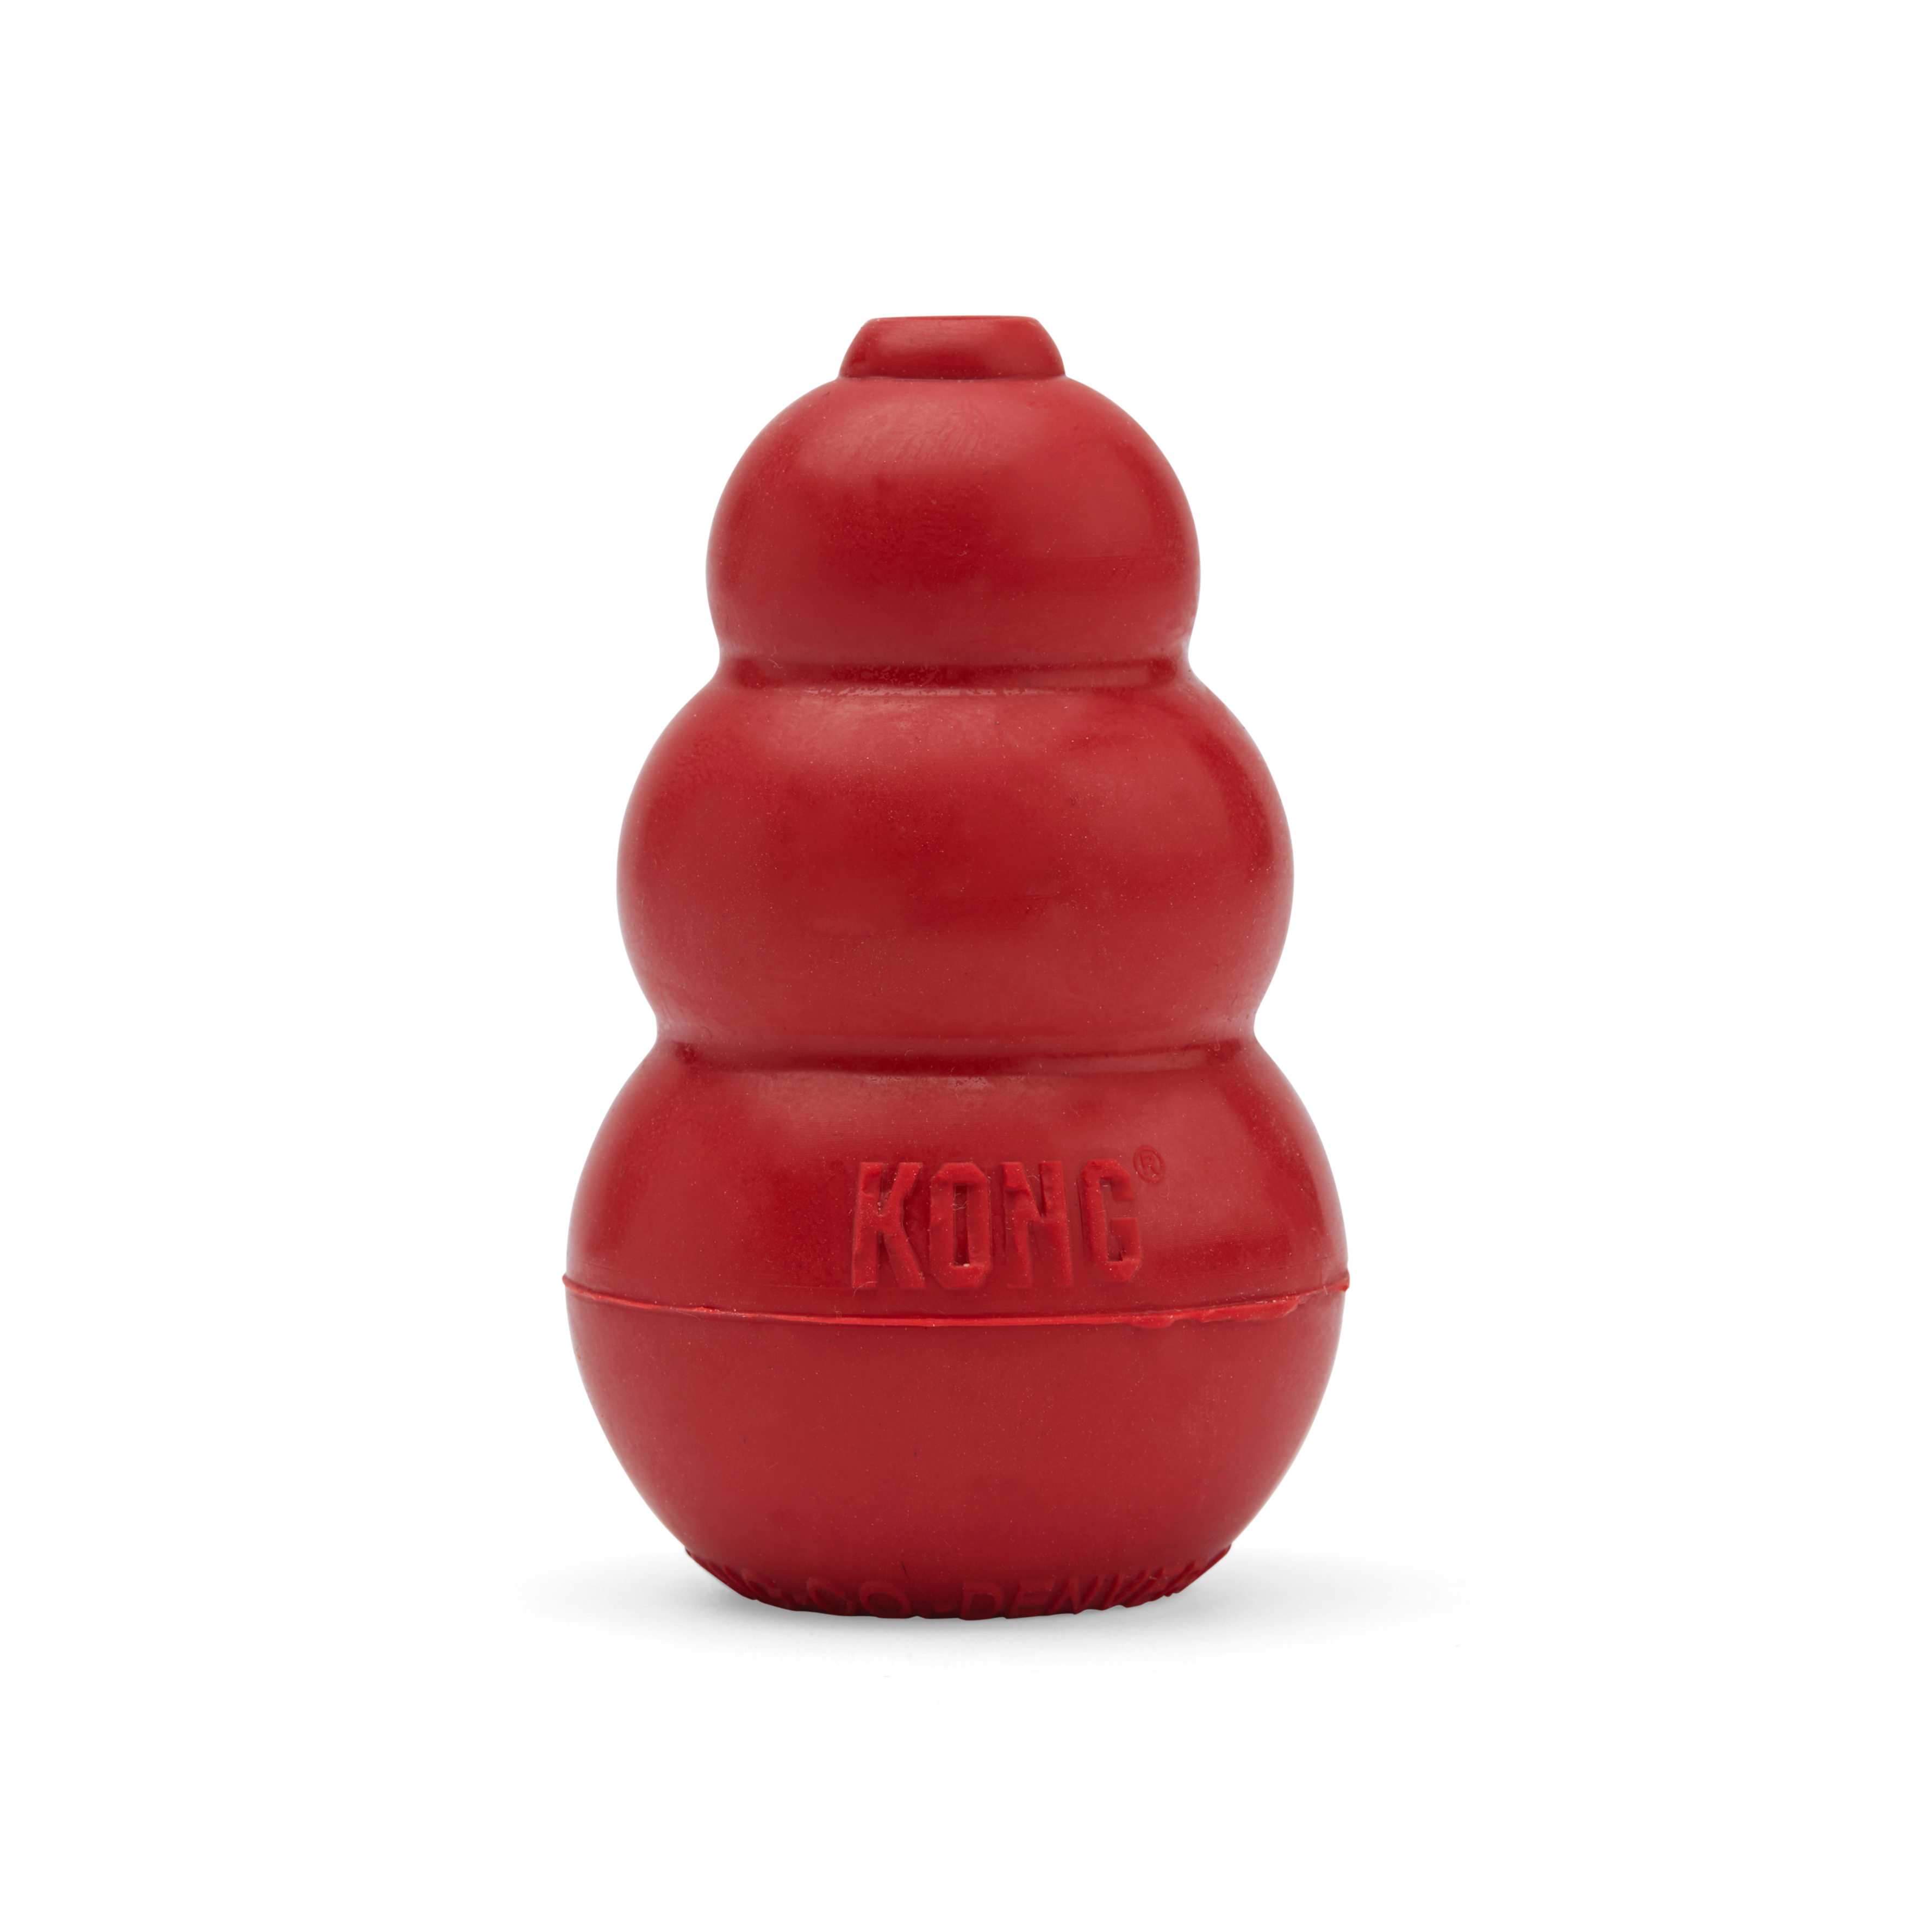 ULTIMATE Kong Bundle - Kong Dog Toy Classic Bundled with Kong Easy Treat  (Peanut Butter Flavor)